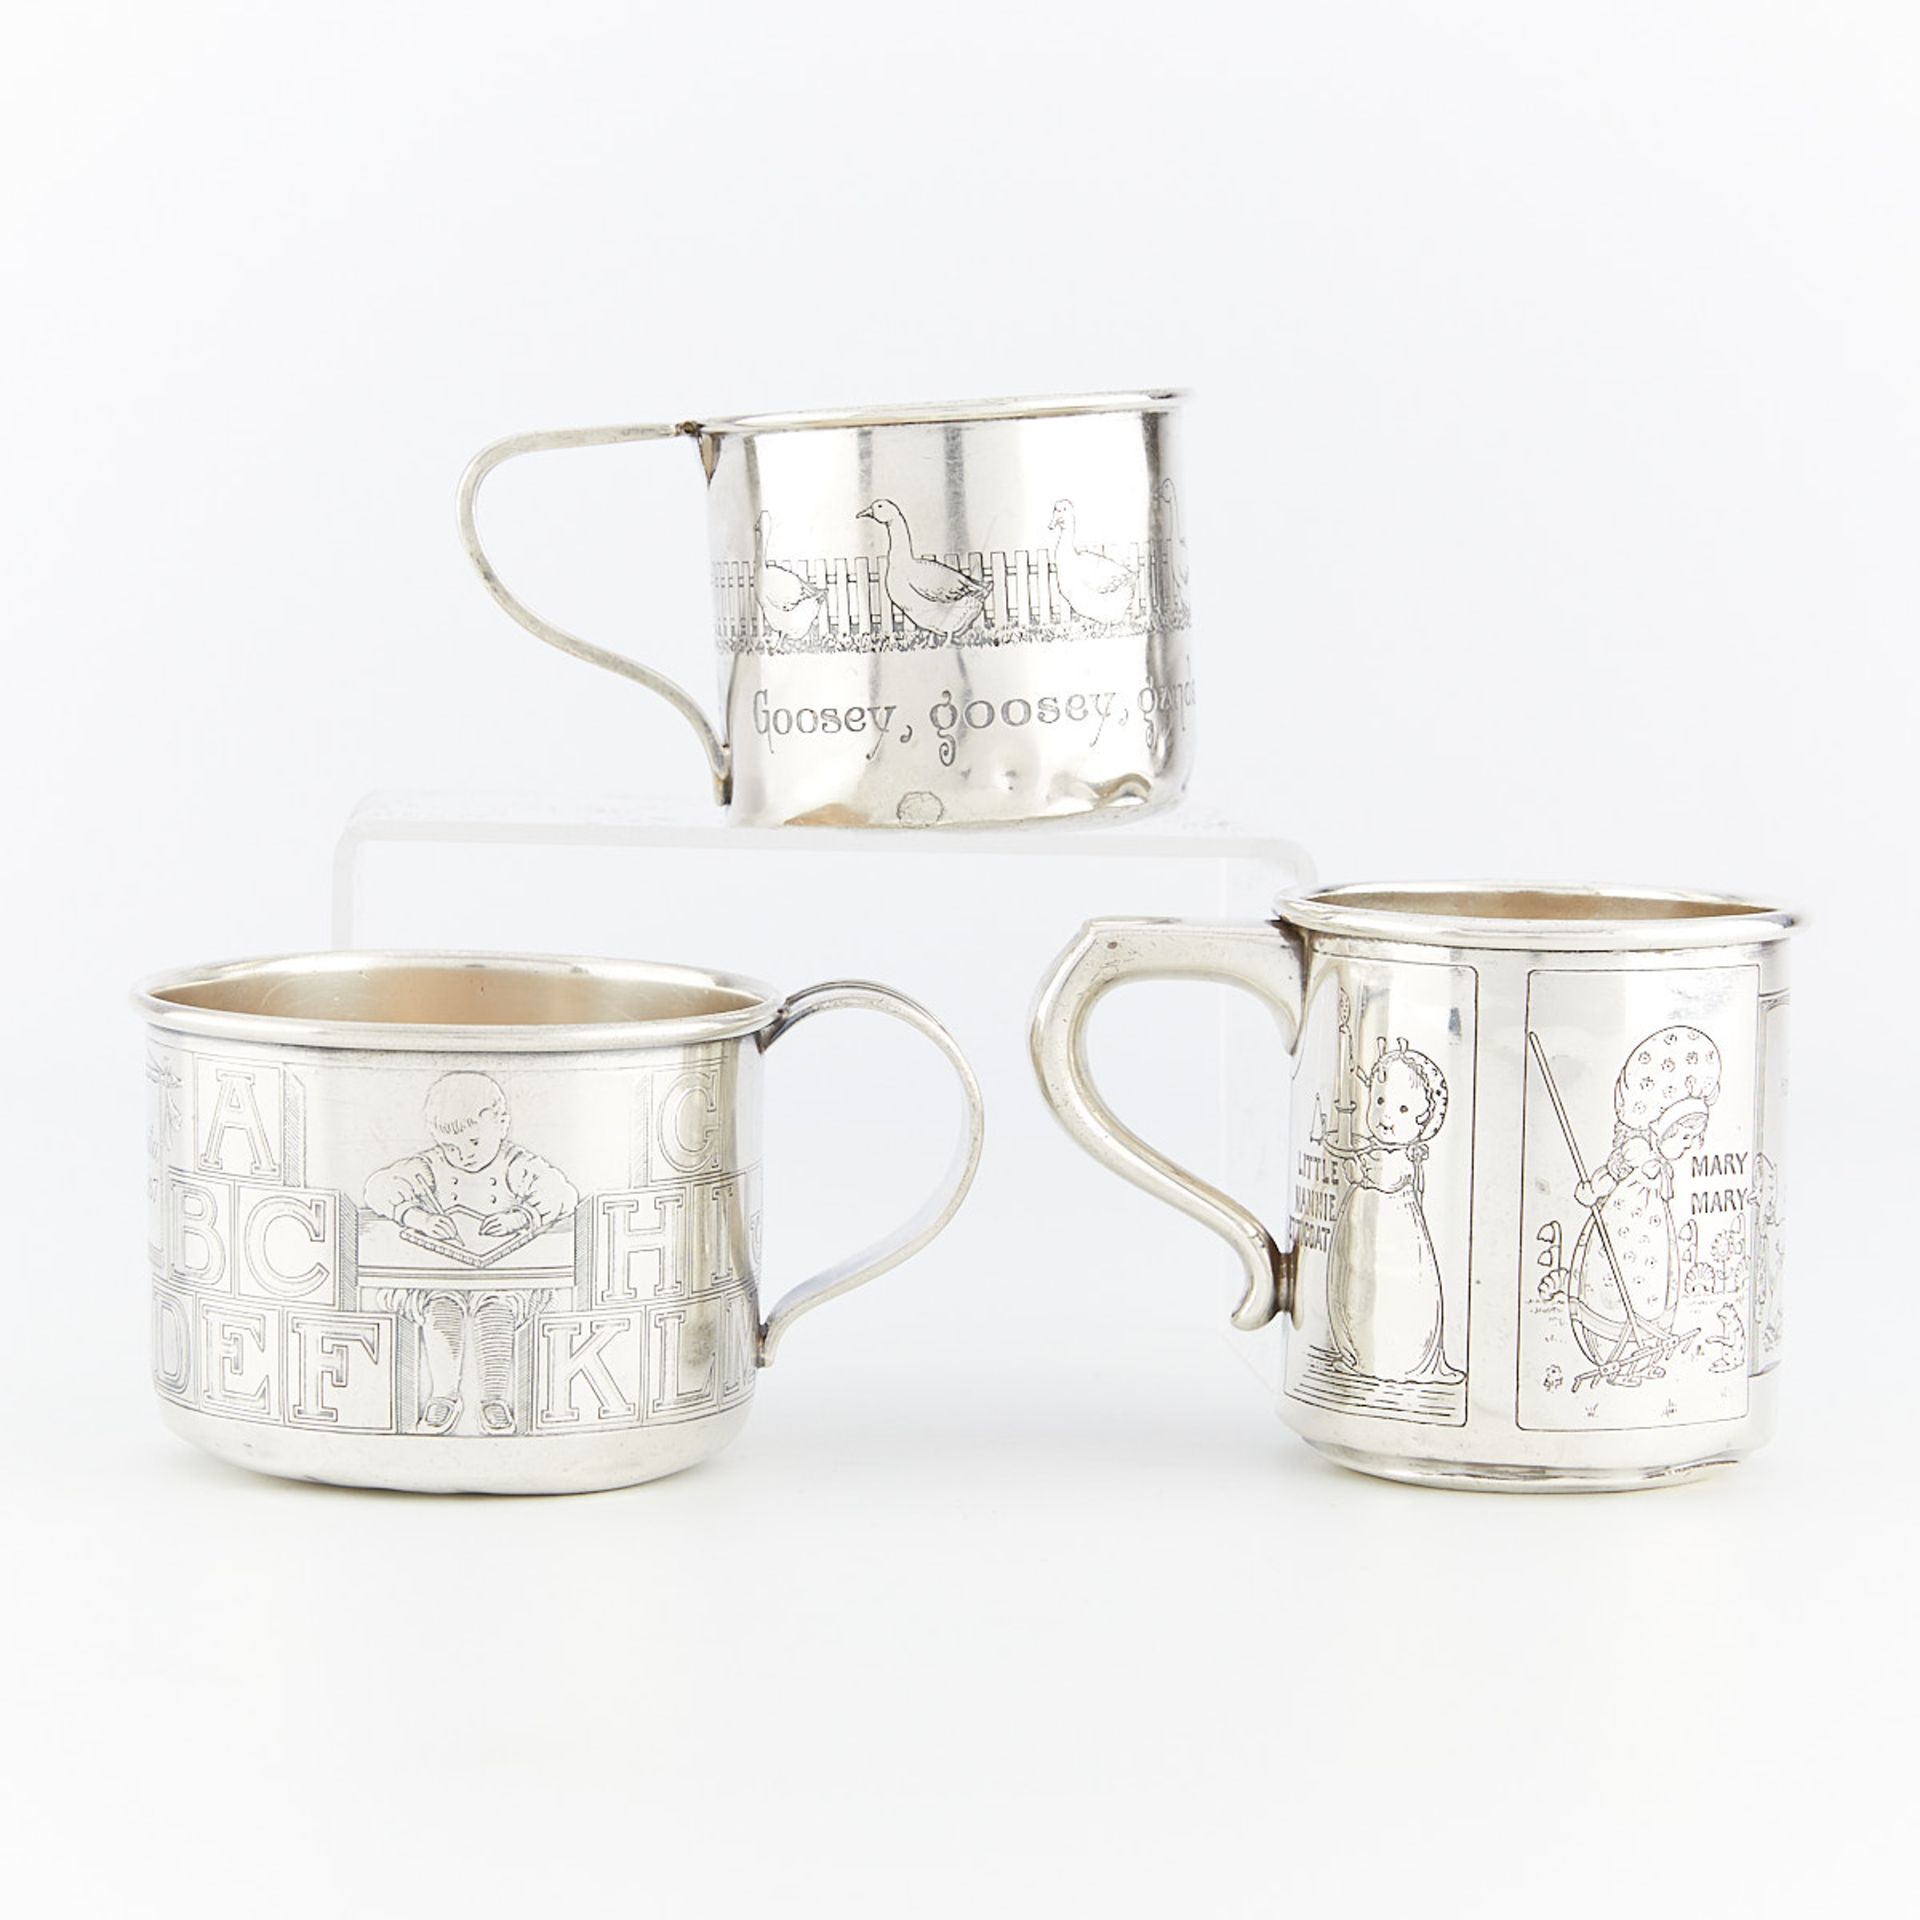 3 Sterling Silver Children's Mugs - Image 4 of 16